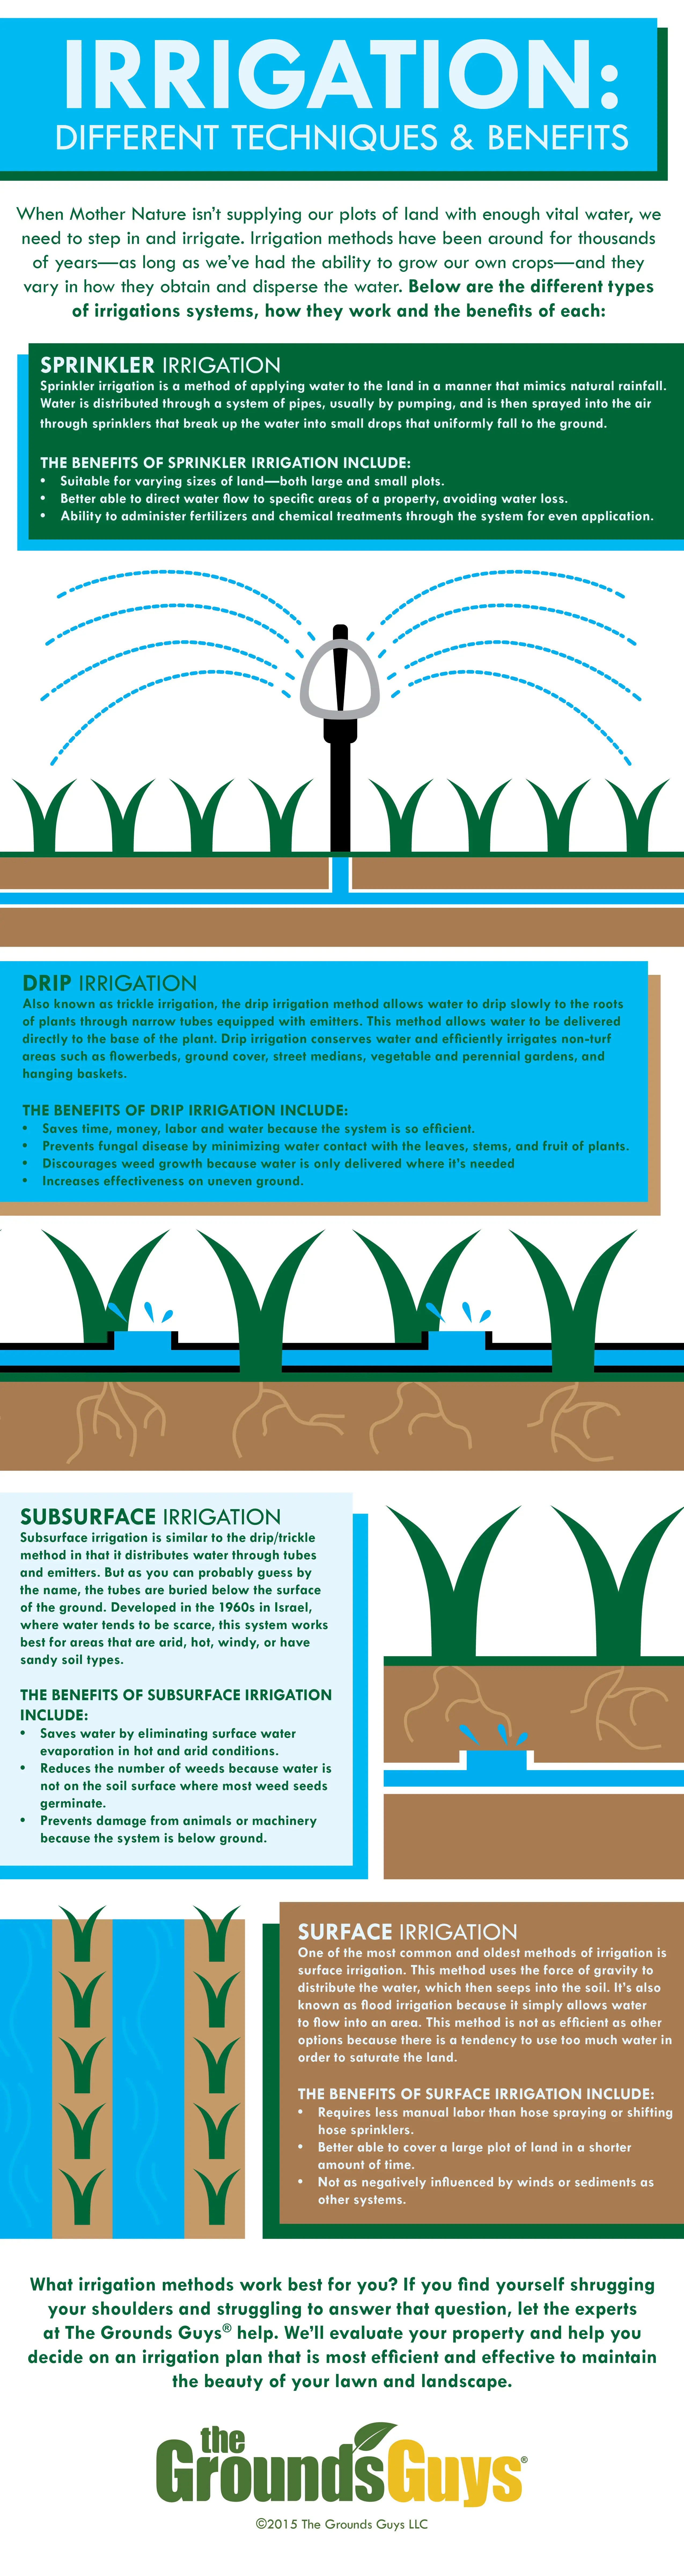 Irrigation: Different Techniques and Benefits infographic